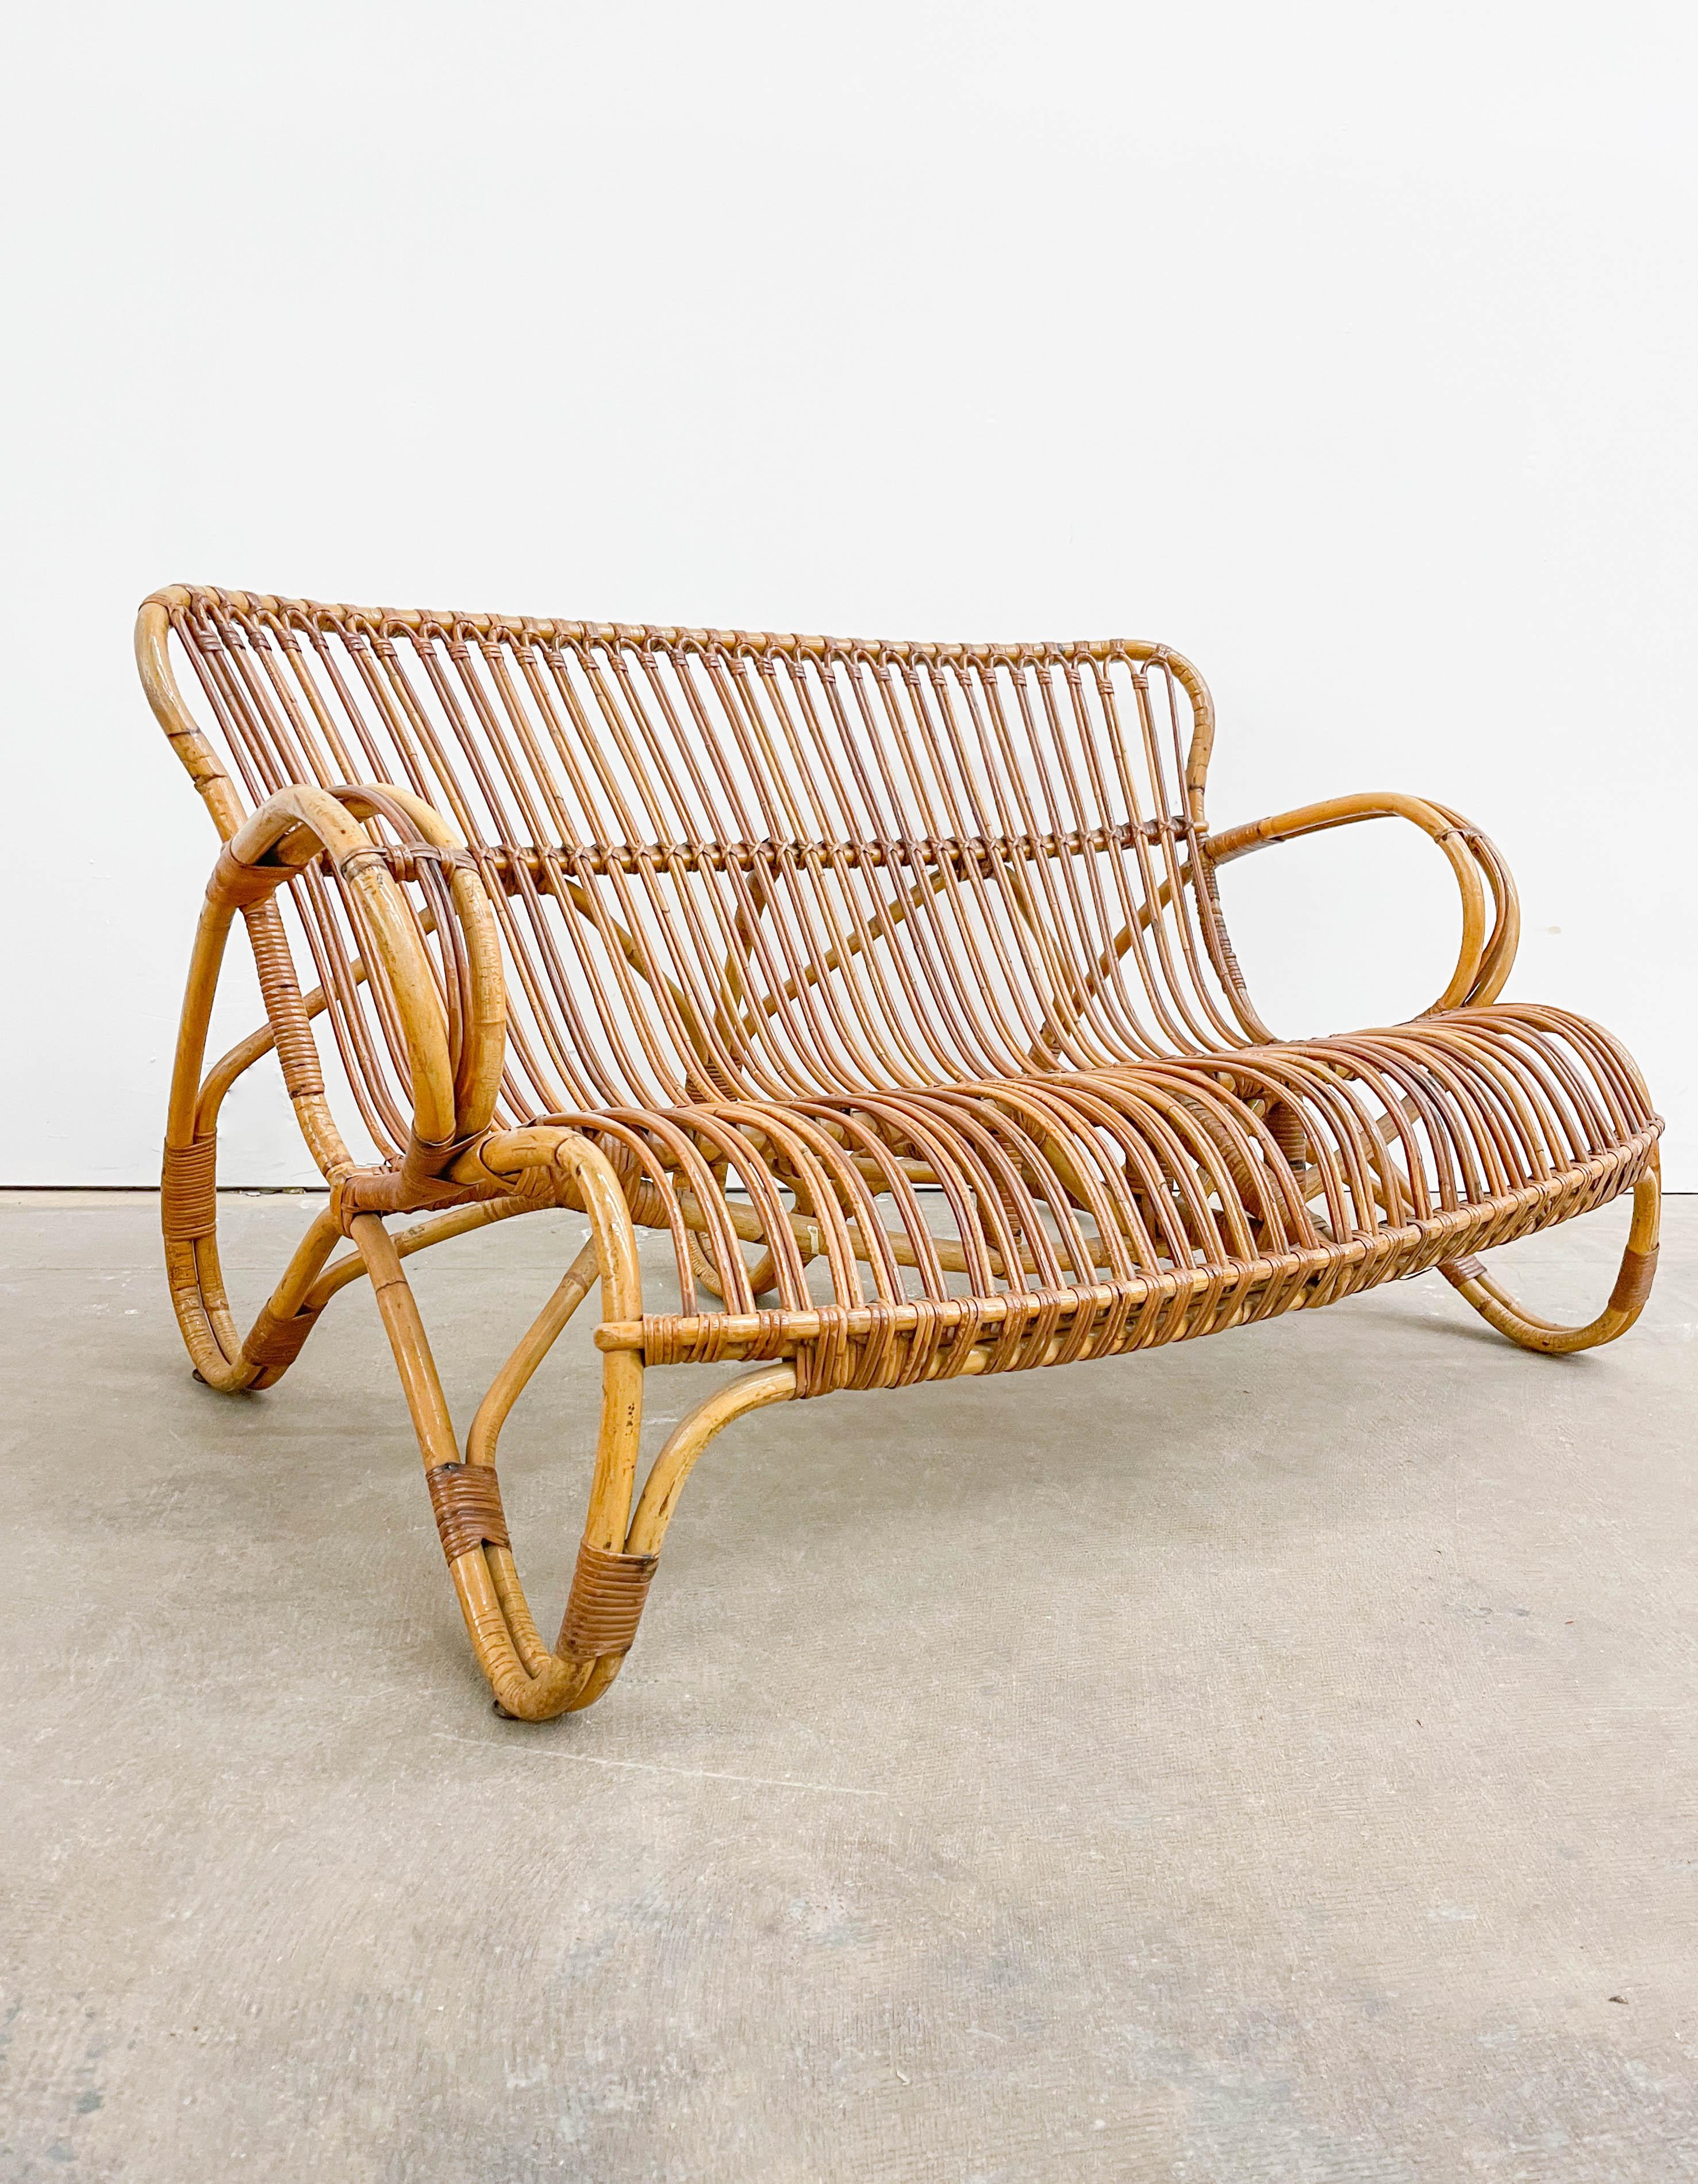 Dutch Vintage Sculptural Bamboo Sofa by Rohe Noorwolde, 1960s For Sale